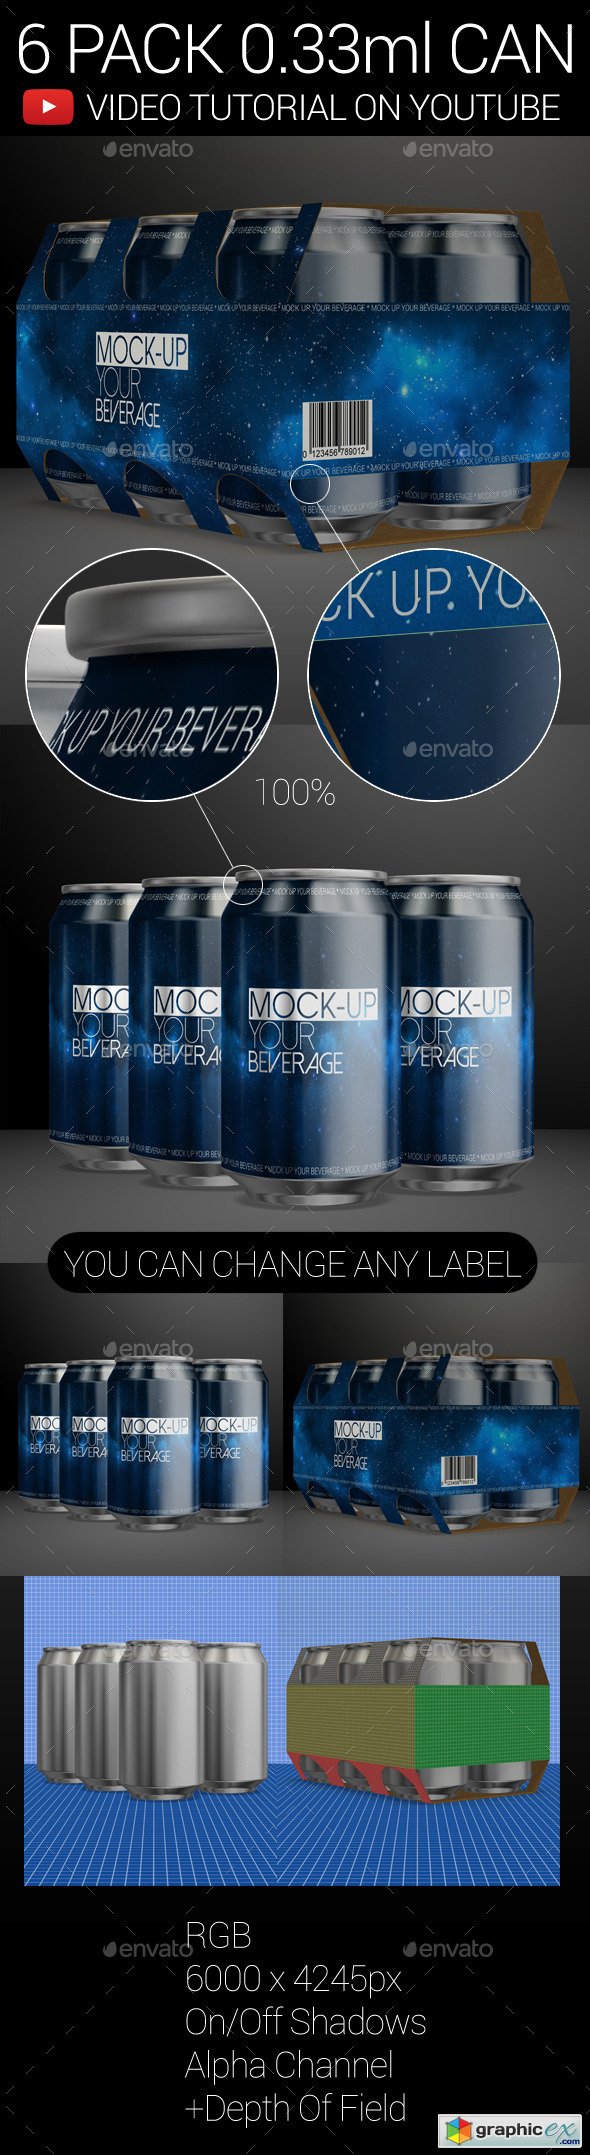 6 Pack 0.33ml Can 02